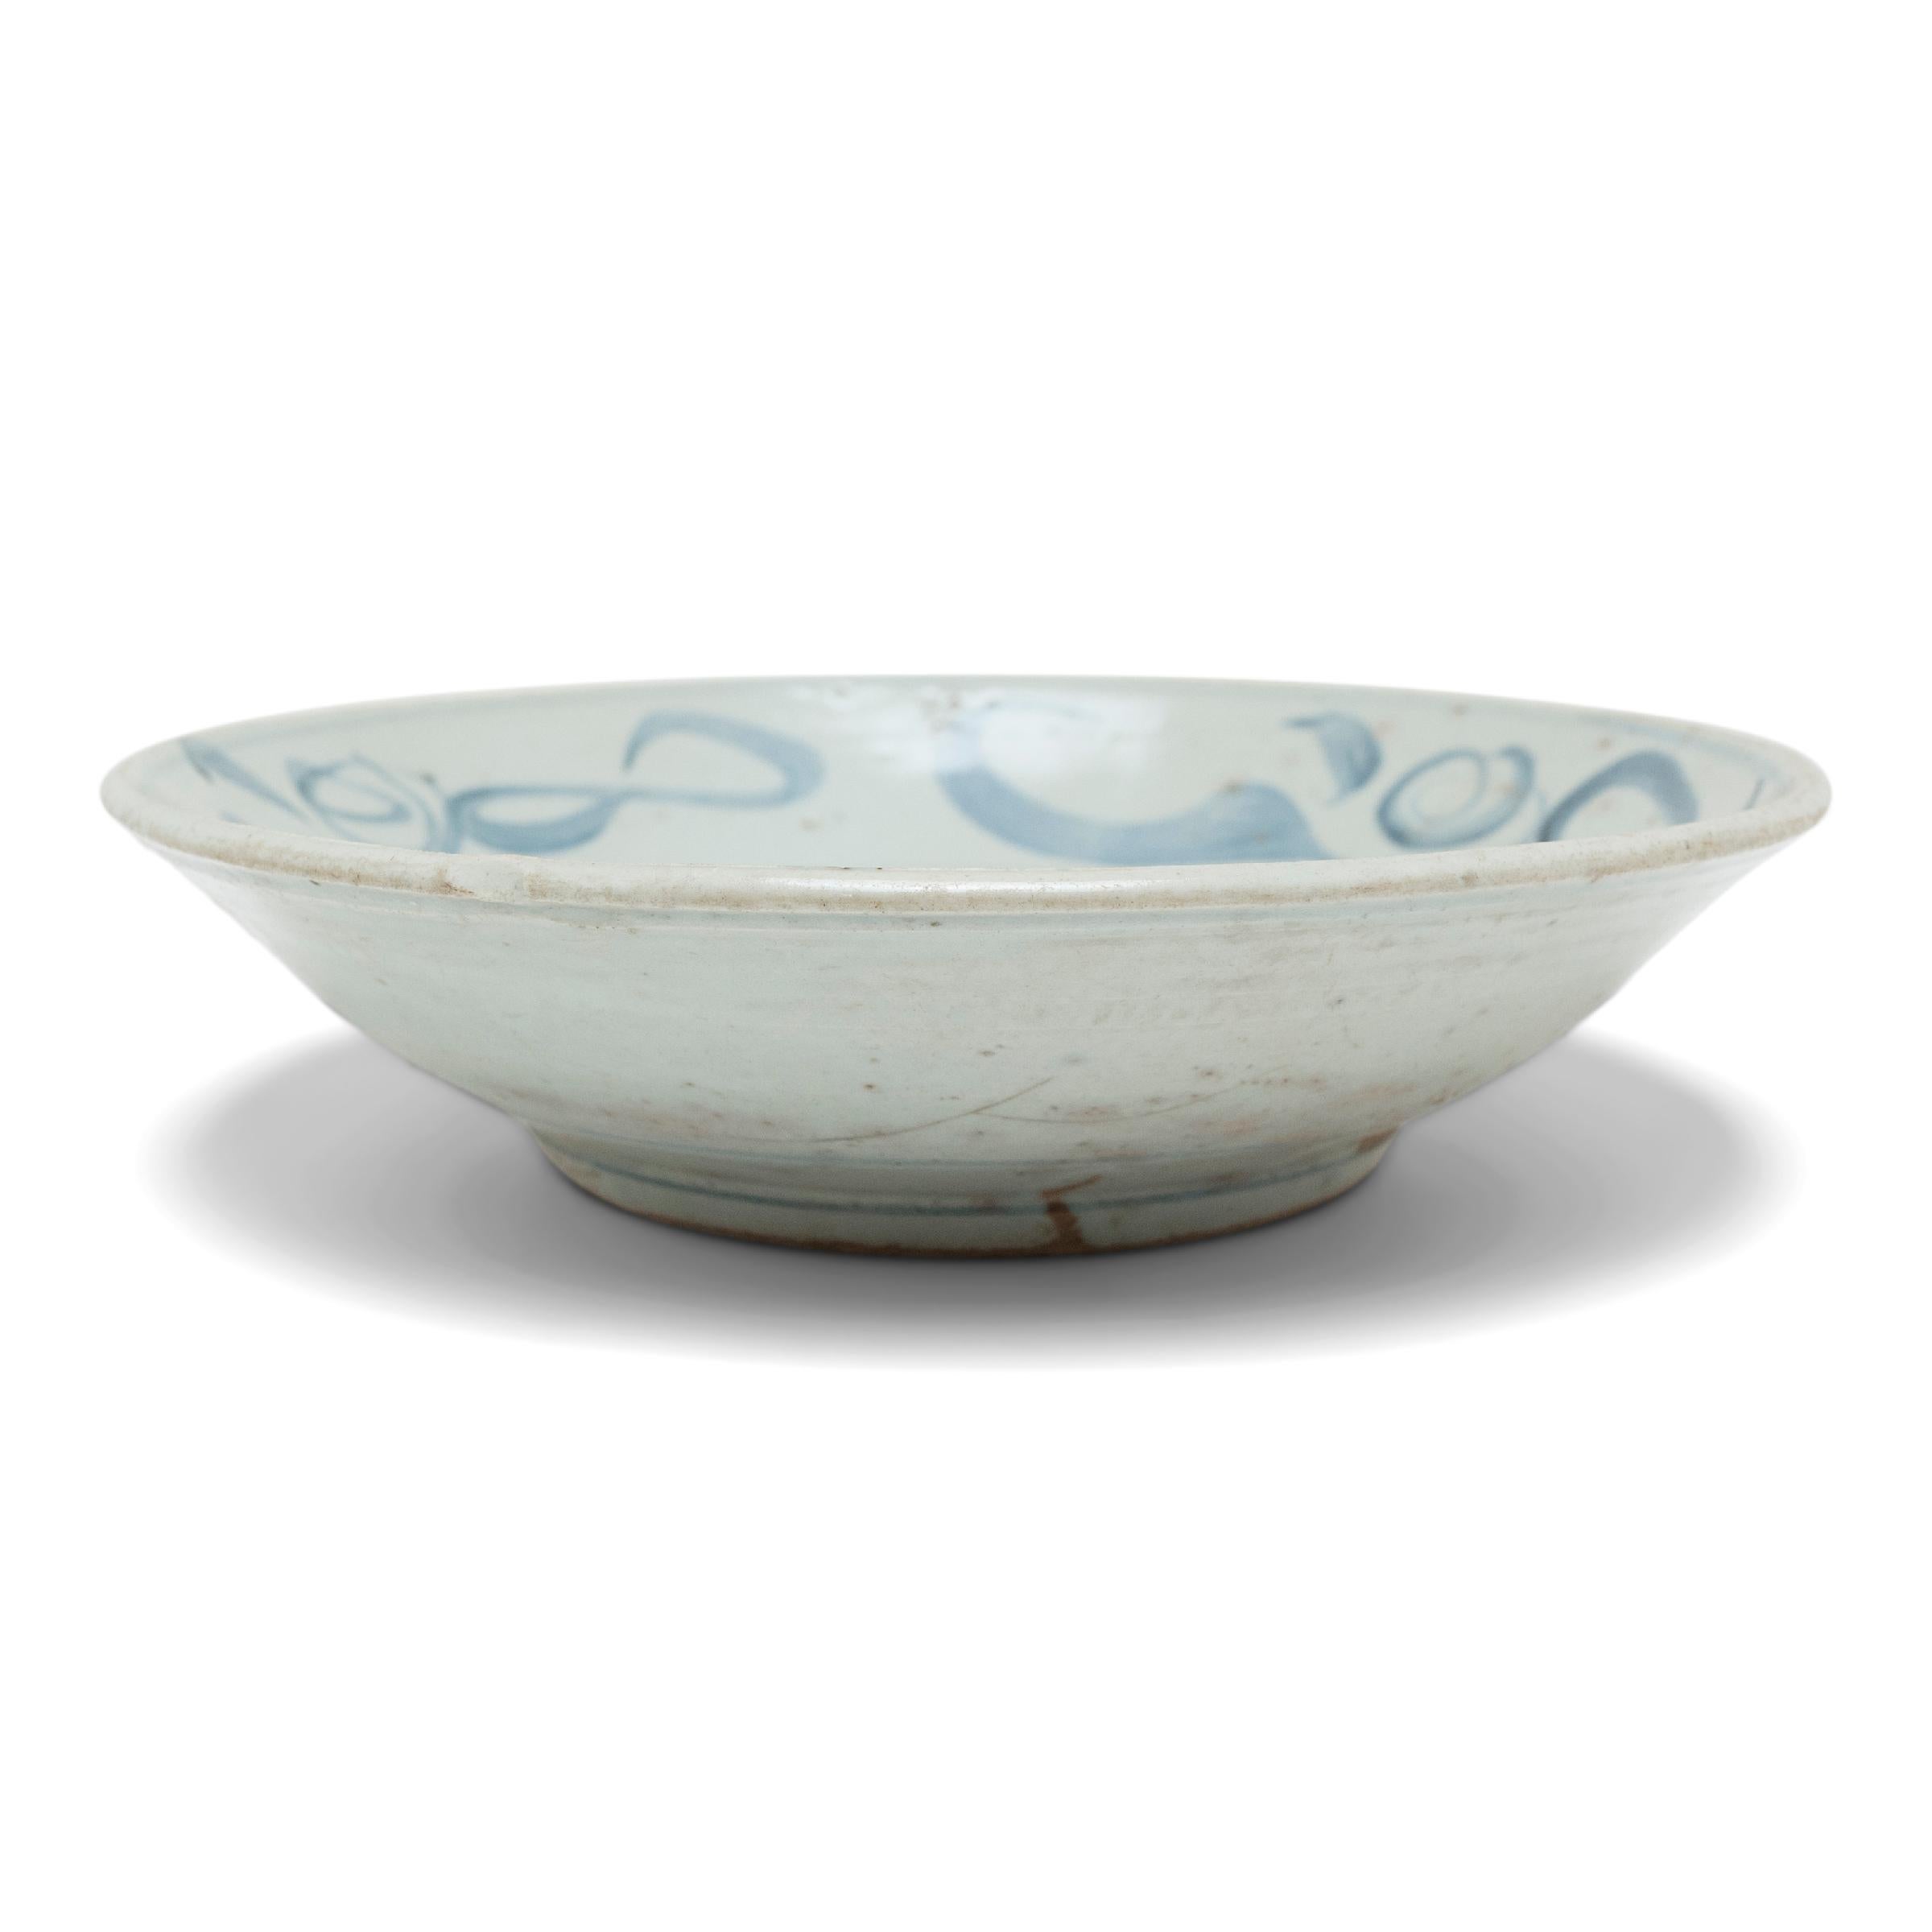 This mid-19th century footed plate is cloaked in a cool, off-white glaze and brushed with calligraphic sweeps of blue, bringing life and character to its simple ceramic form. Once used as an everyday serving dish, this expressive example of Chinese